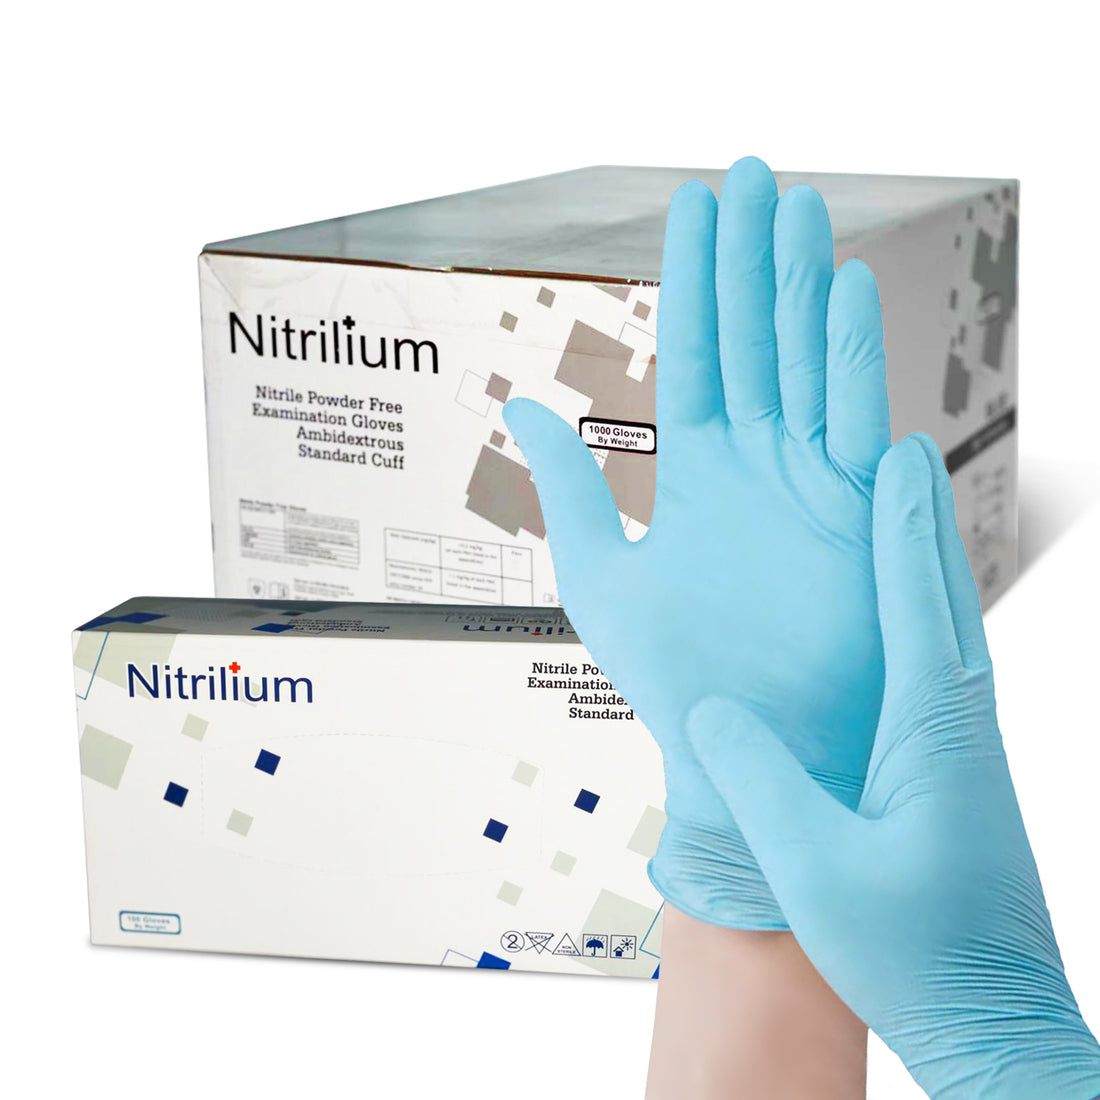 What is the Difference between Vinyl, Nitrile, and Latex Gloves?